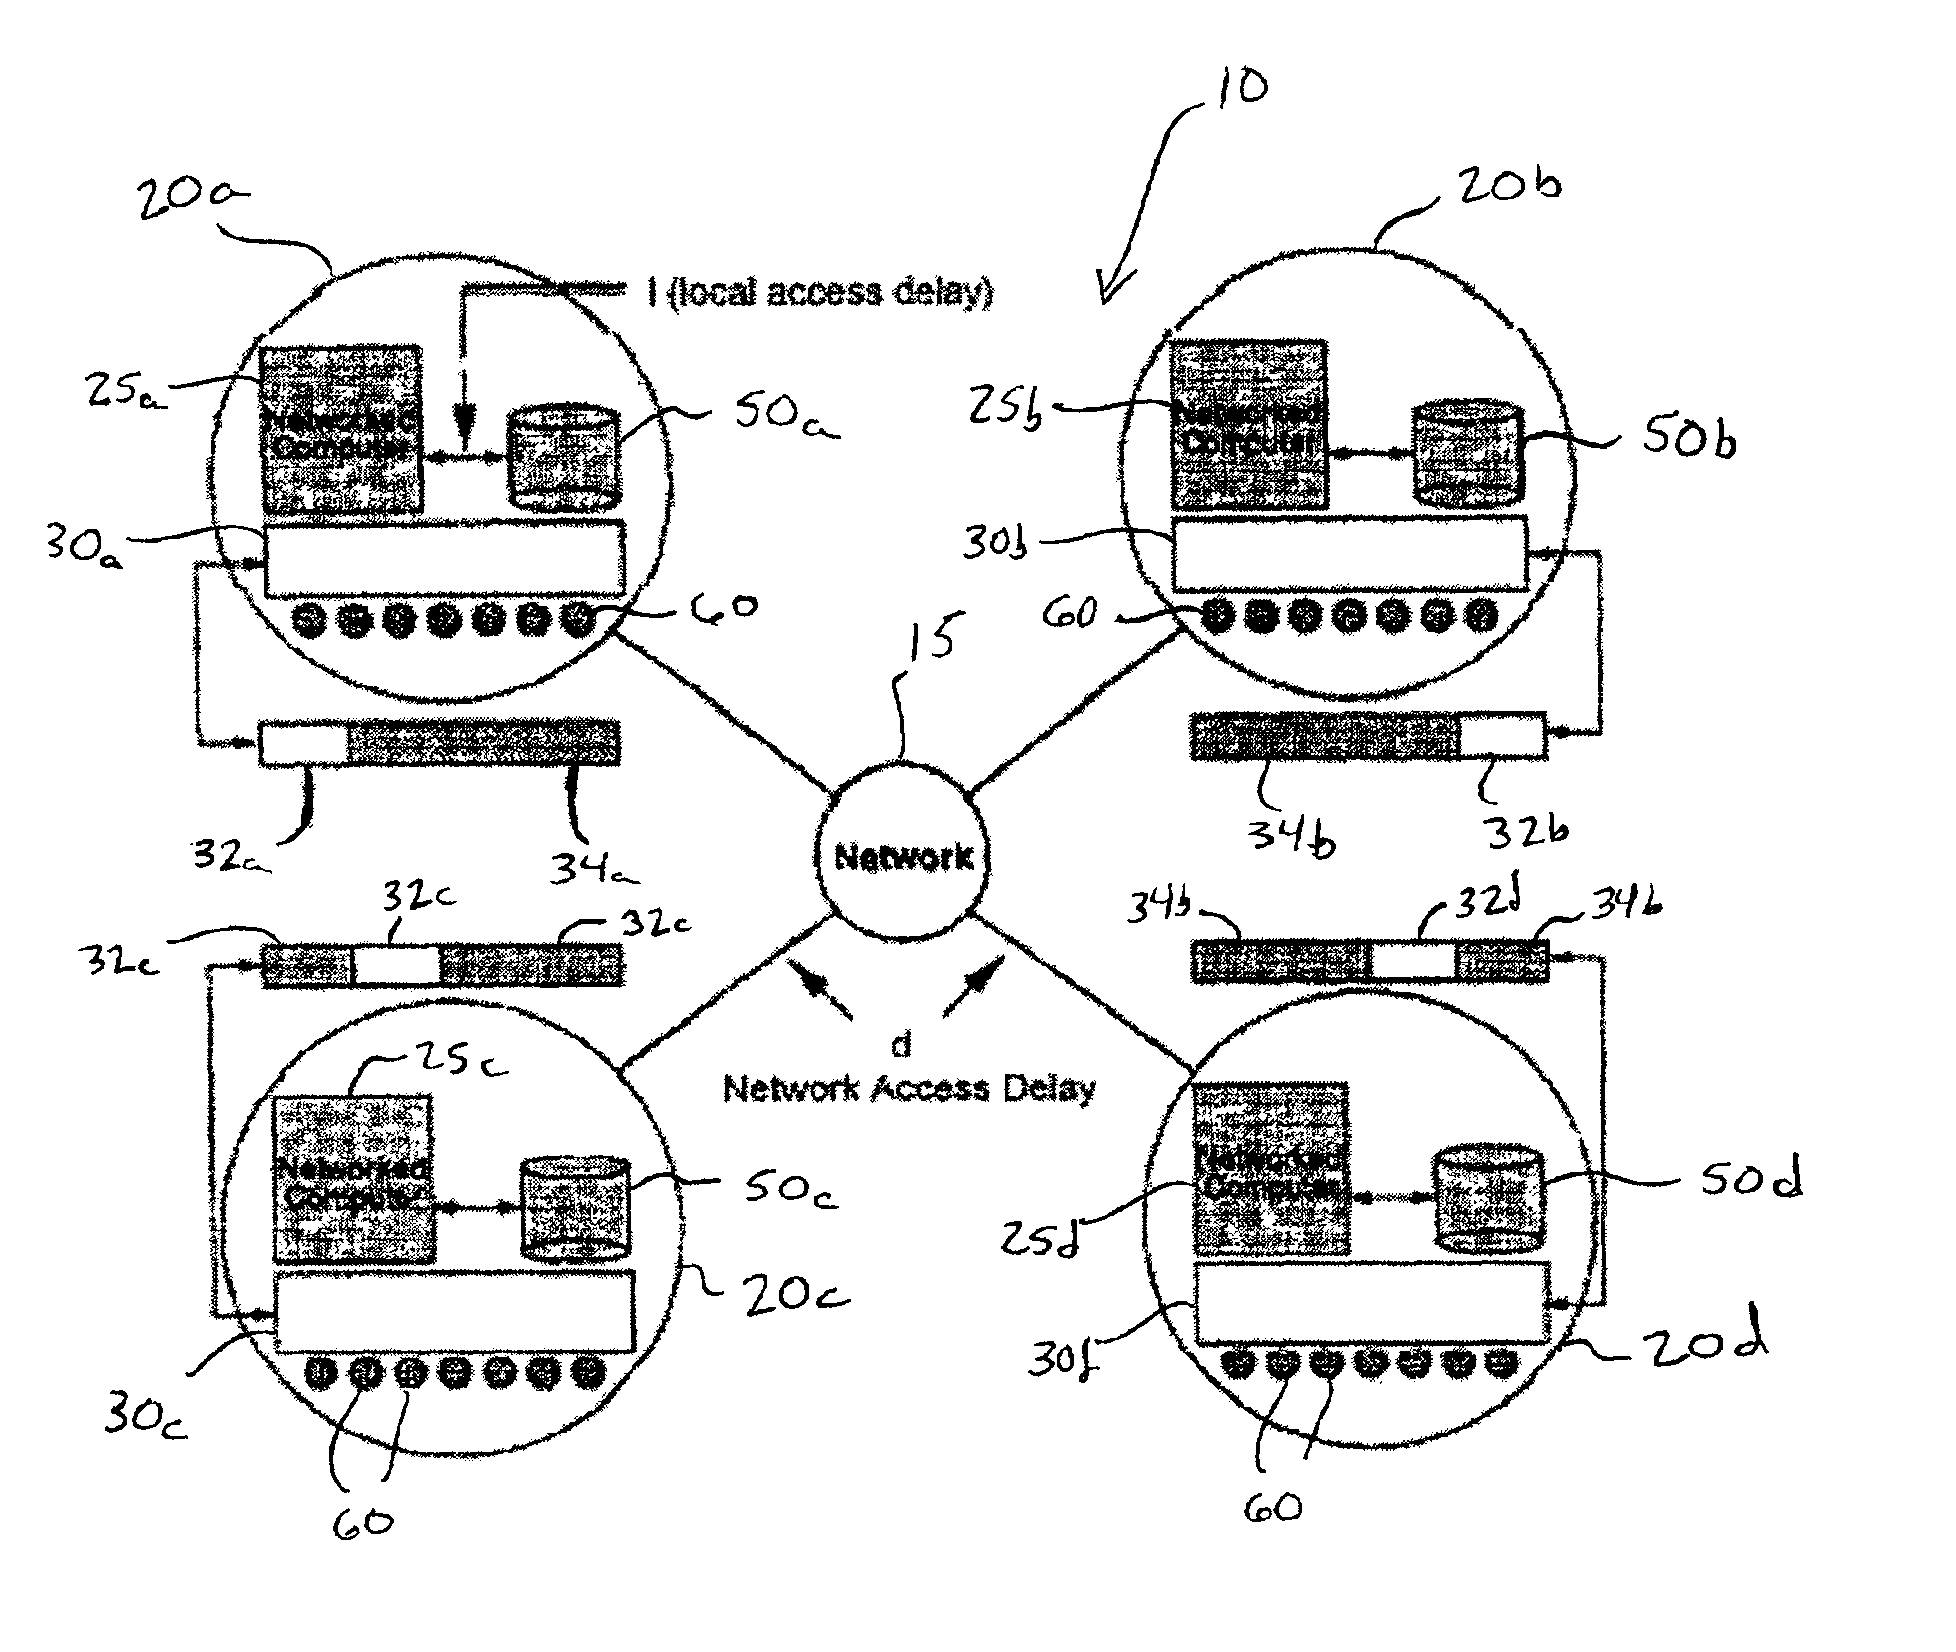 System and method for time-efficient distributed search and decision-making using cooperative co-evolutionary algorithms executing in a distributed multi-agent architecture